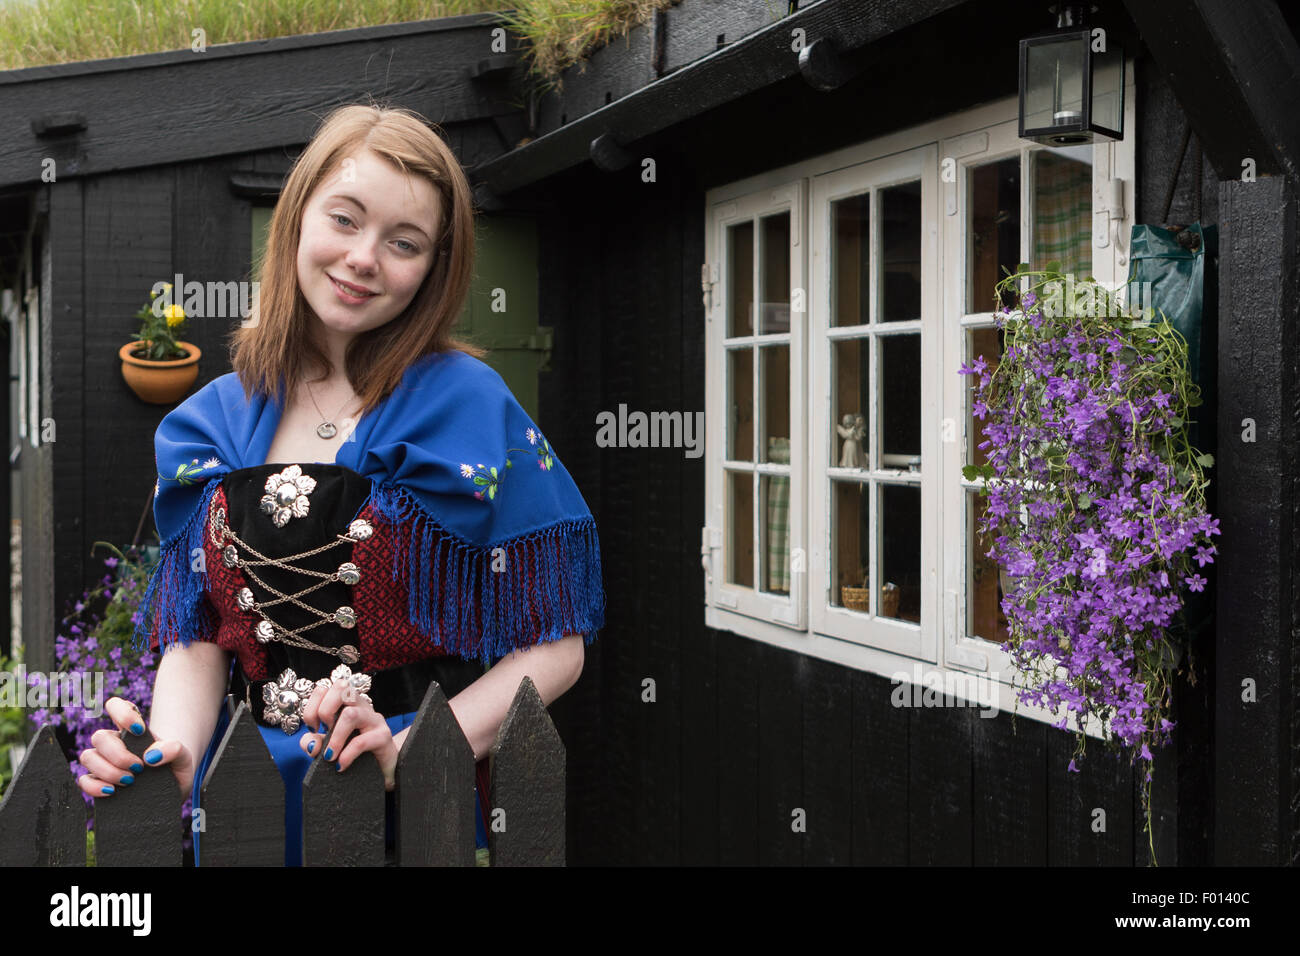 Faroese People High Resolution Stock Photography and Images - Alamy